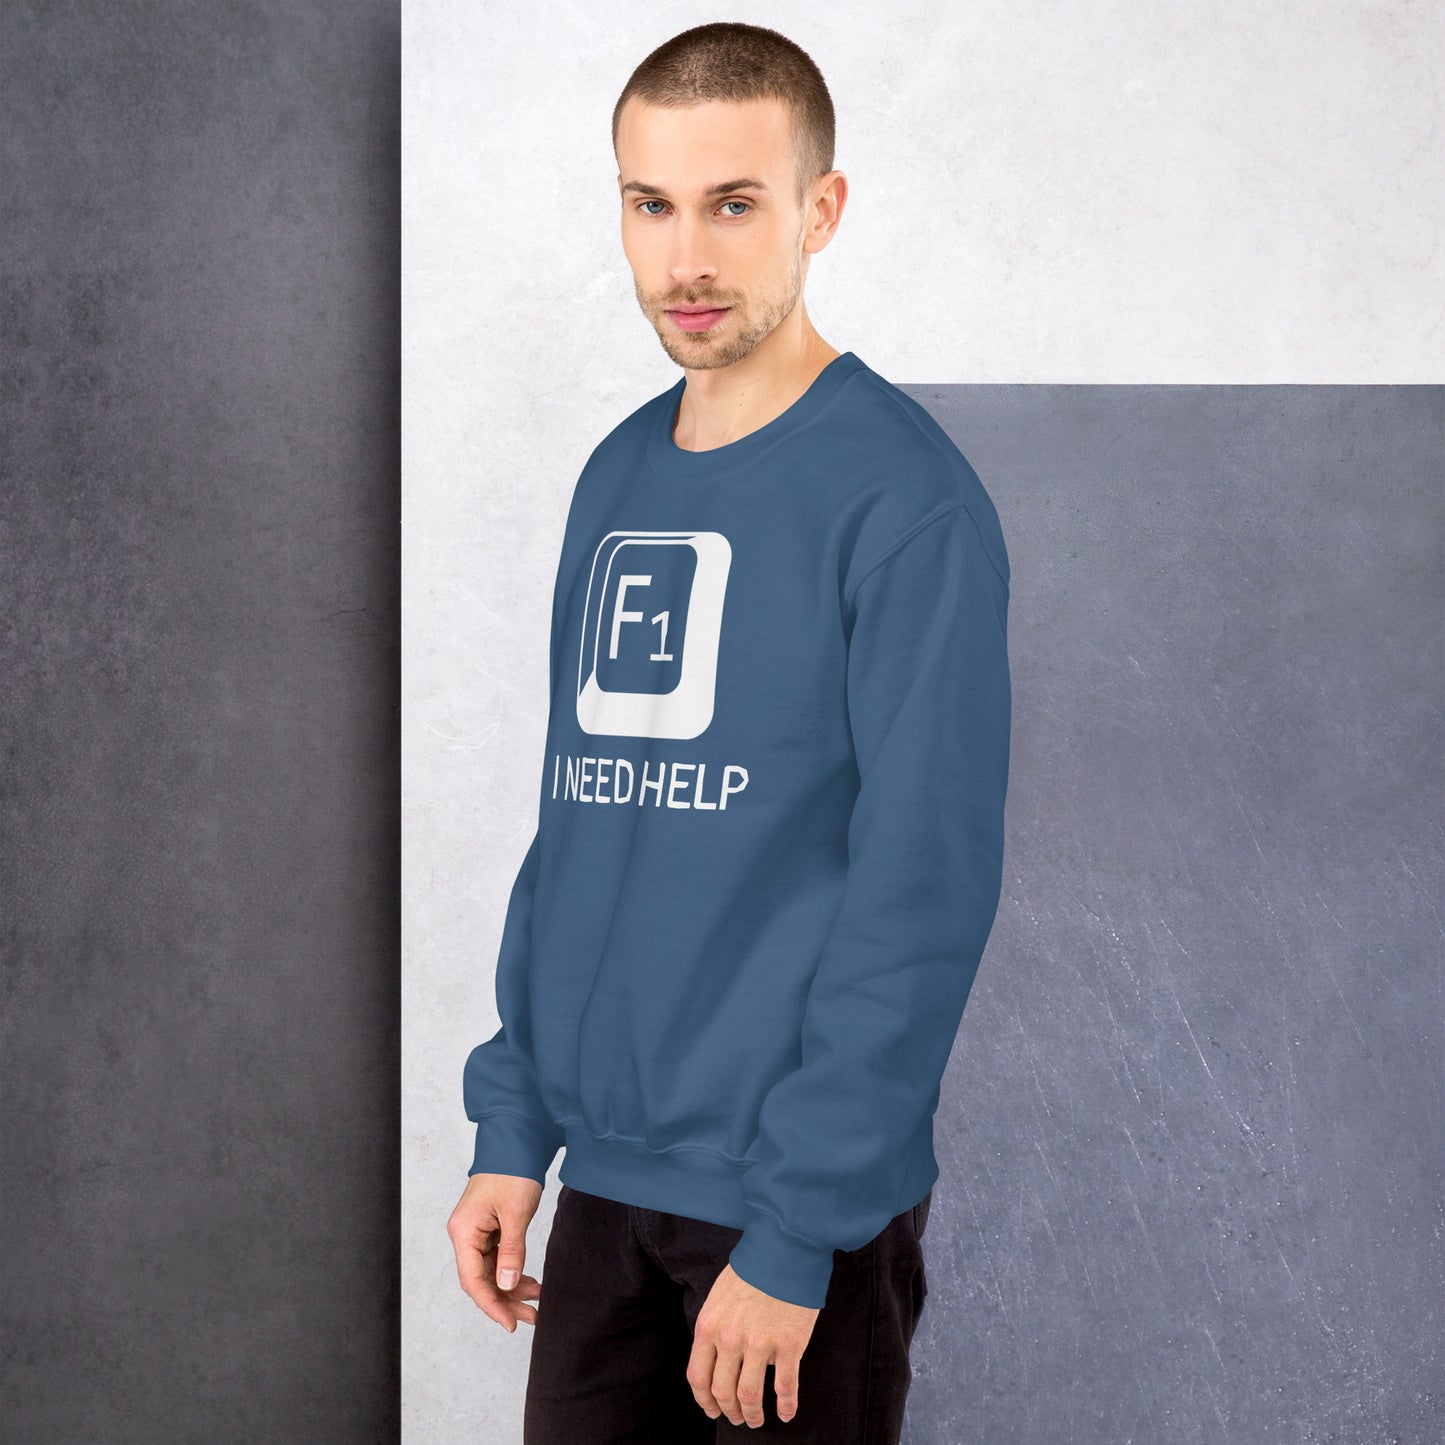 Men with indigo blue sweatshirt and a picture of F1 key with text "I need help"